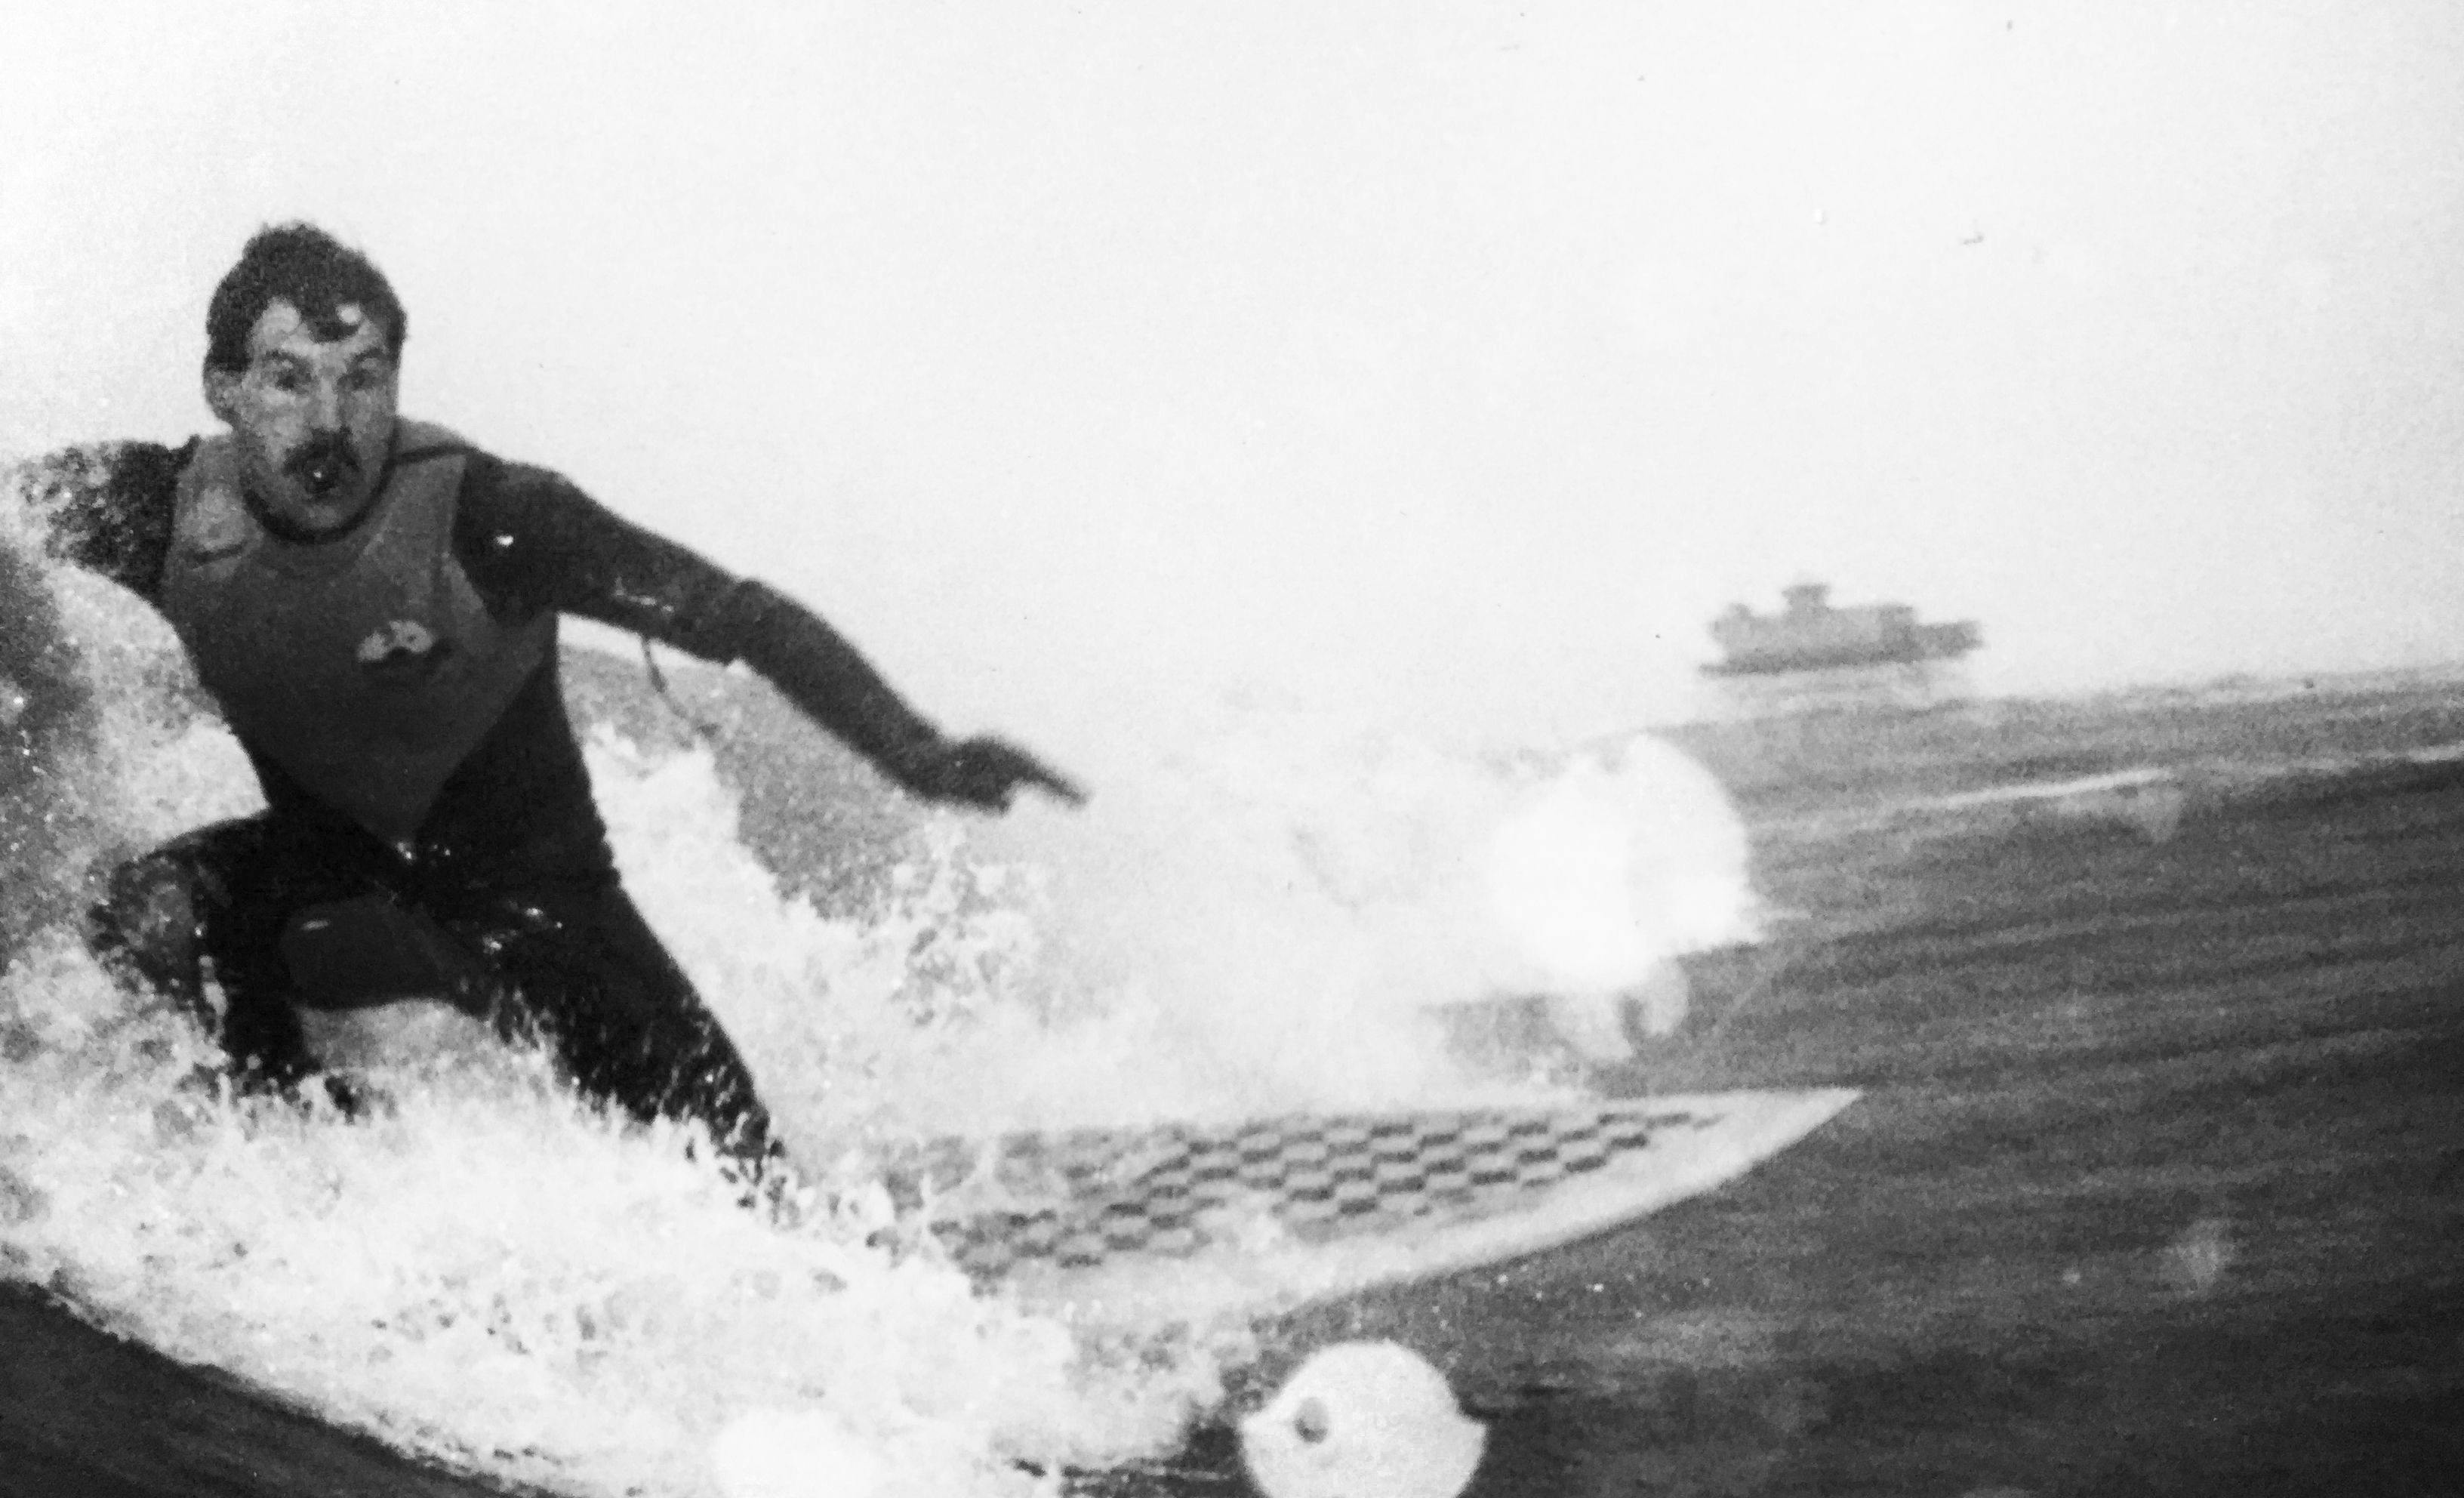 One of the few photos of my dad surfing. Using a homemade camera housing, on a historical day. January 11th 1978 a storm caused the collapse of Skegness Pier, destroying the boardwalk leaving only the end theatre standing, which you can see in the background.